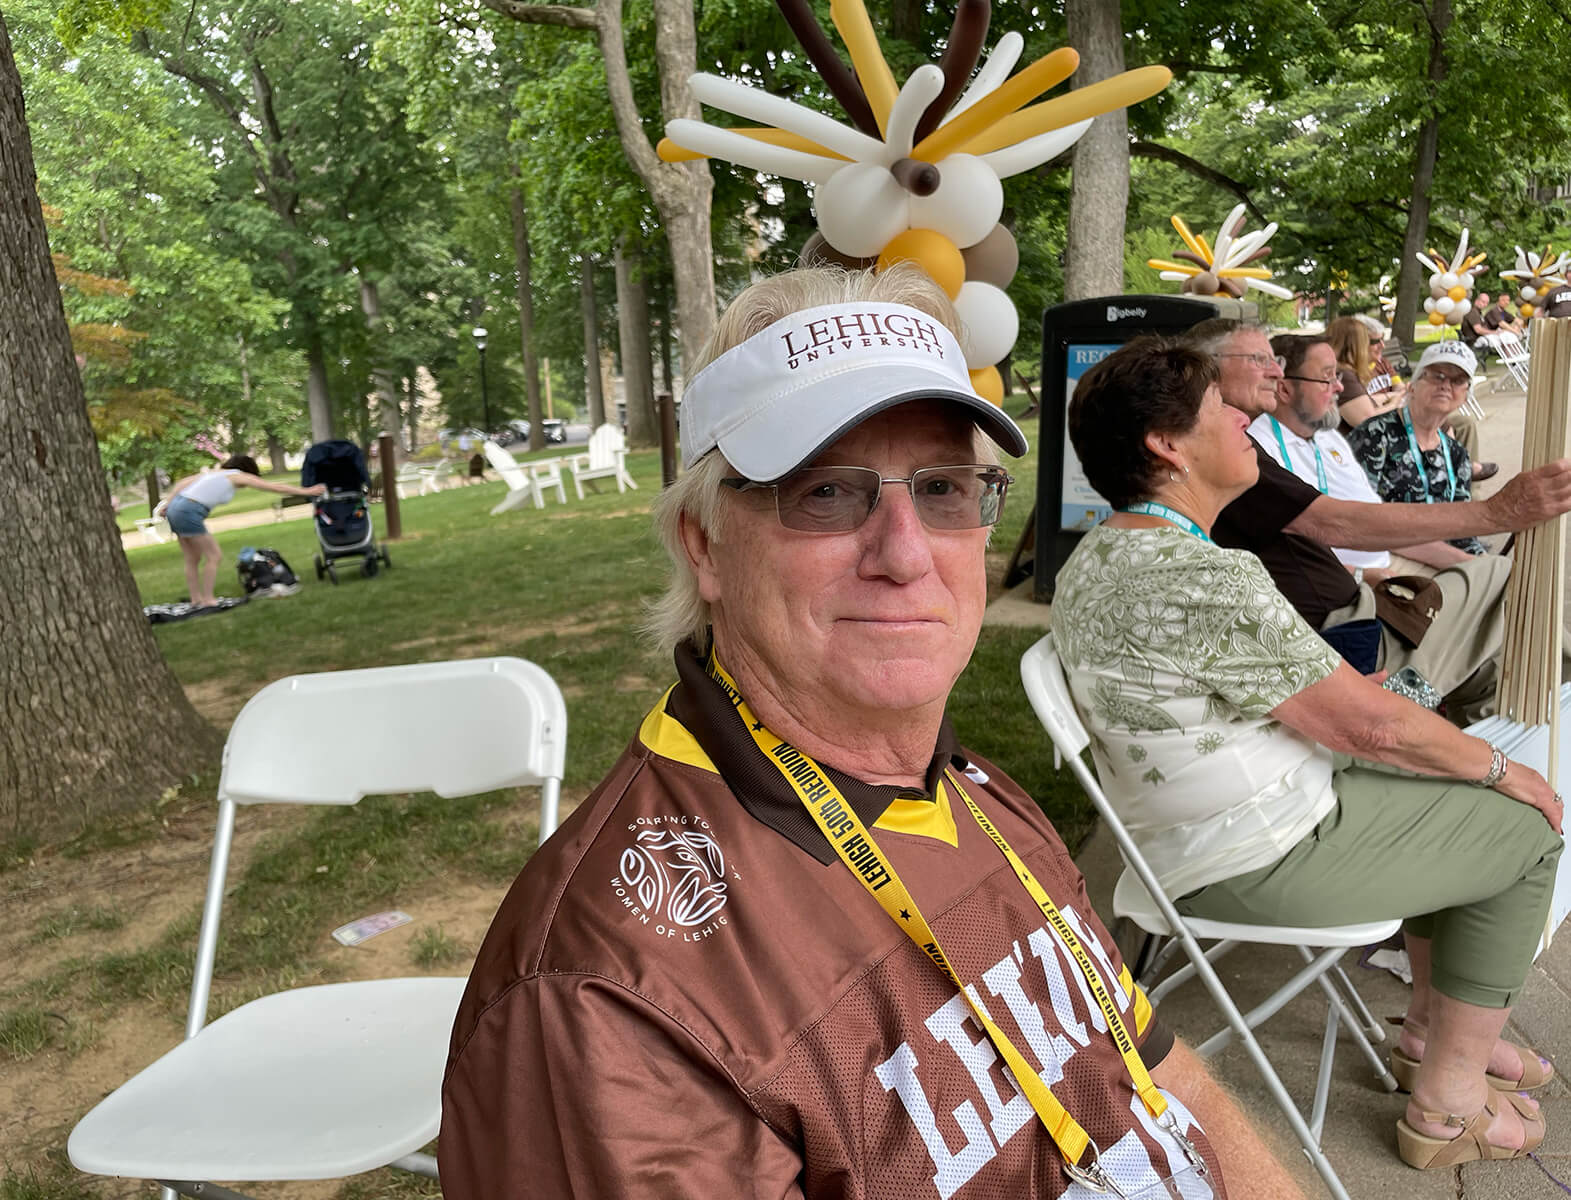 Alumnus sits in a lawn chair at Reunion 2023 wearing a brown Lehigh jersey and lanyard.